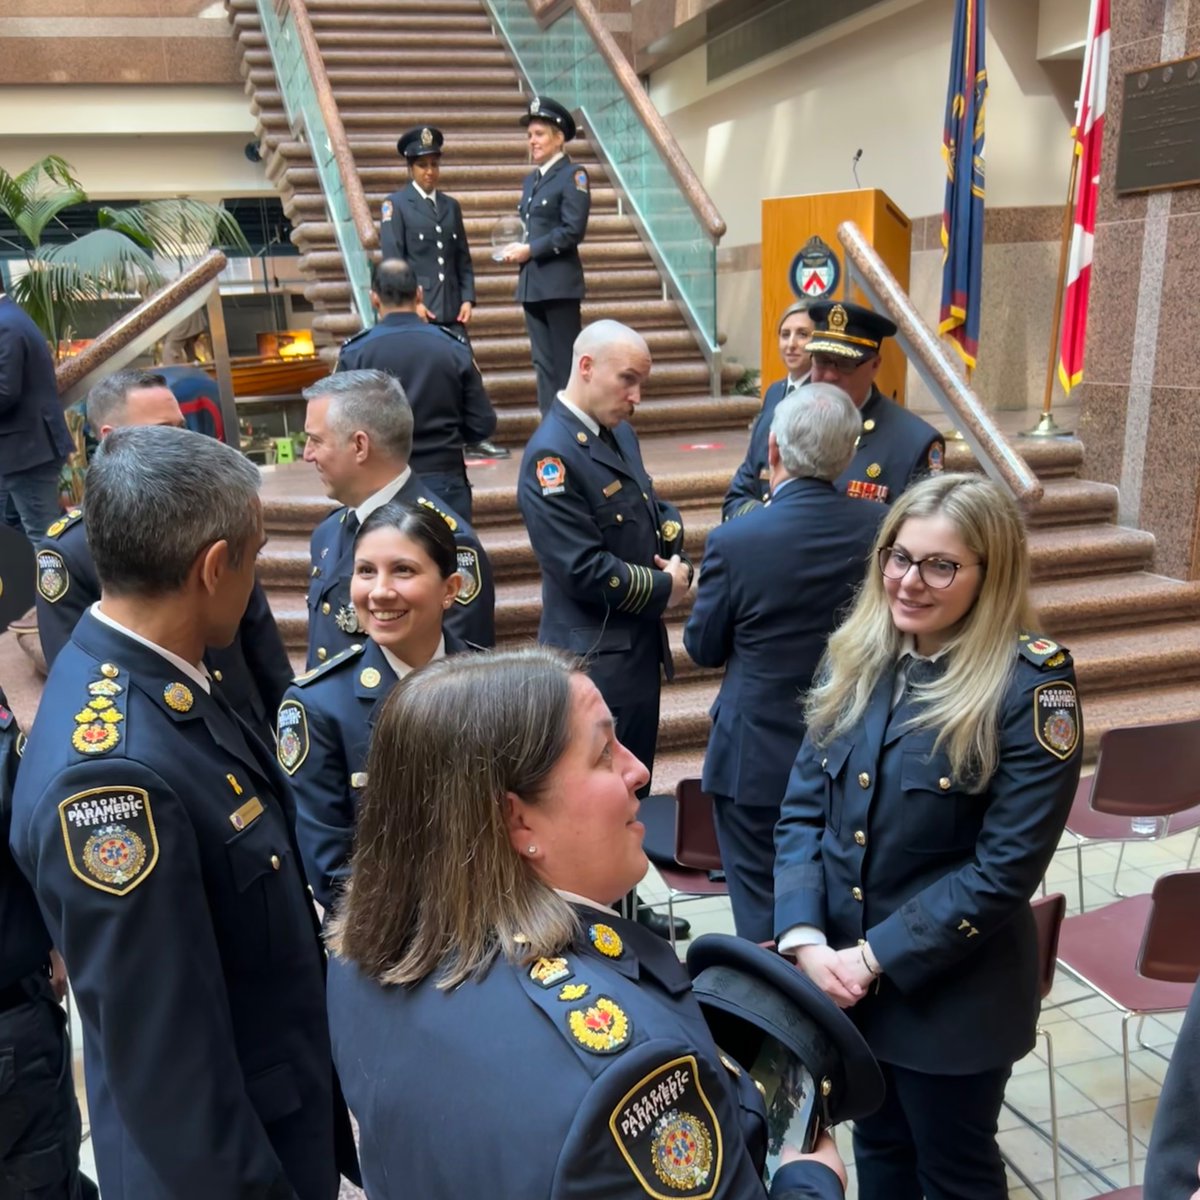 This morning, we gathered at the Tri-Service Telecommunicator Awards to recognize outstanding Telecommunicators from @cityoftoronto emergency services. It was a wonderful way to kick off #NPSTW2024, and we look forward to celebrating our dedicated staff throughout the week.